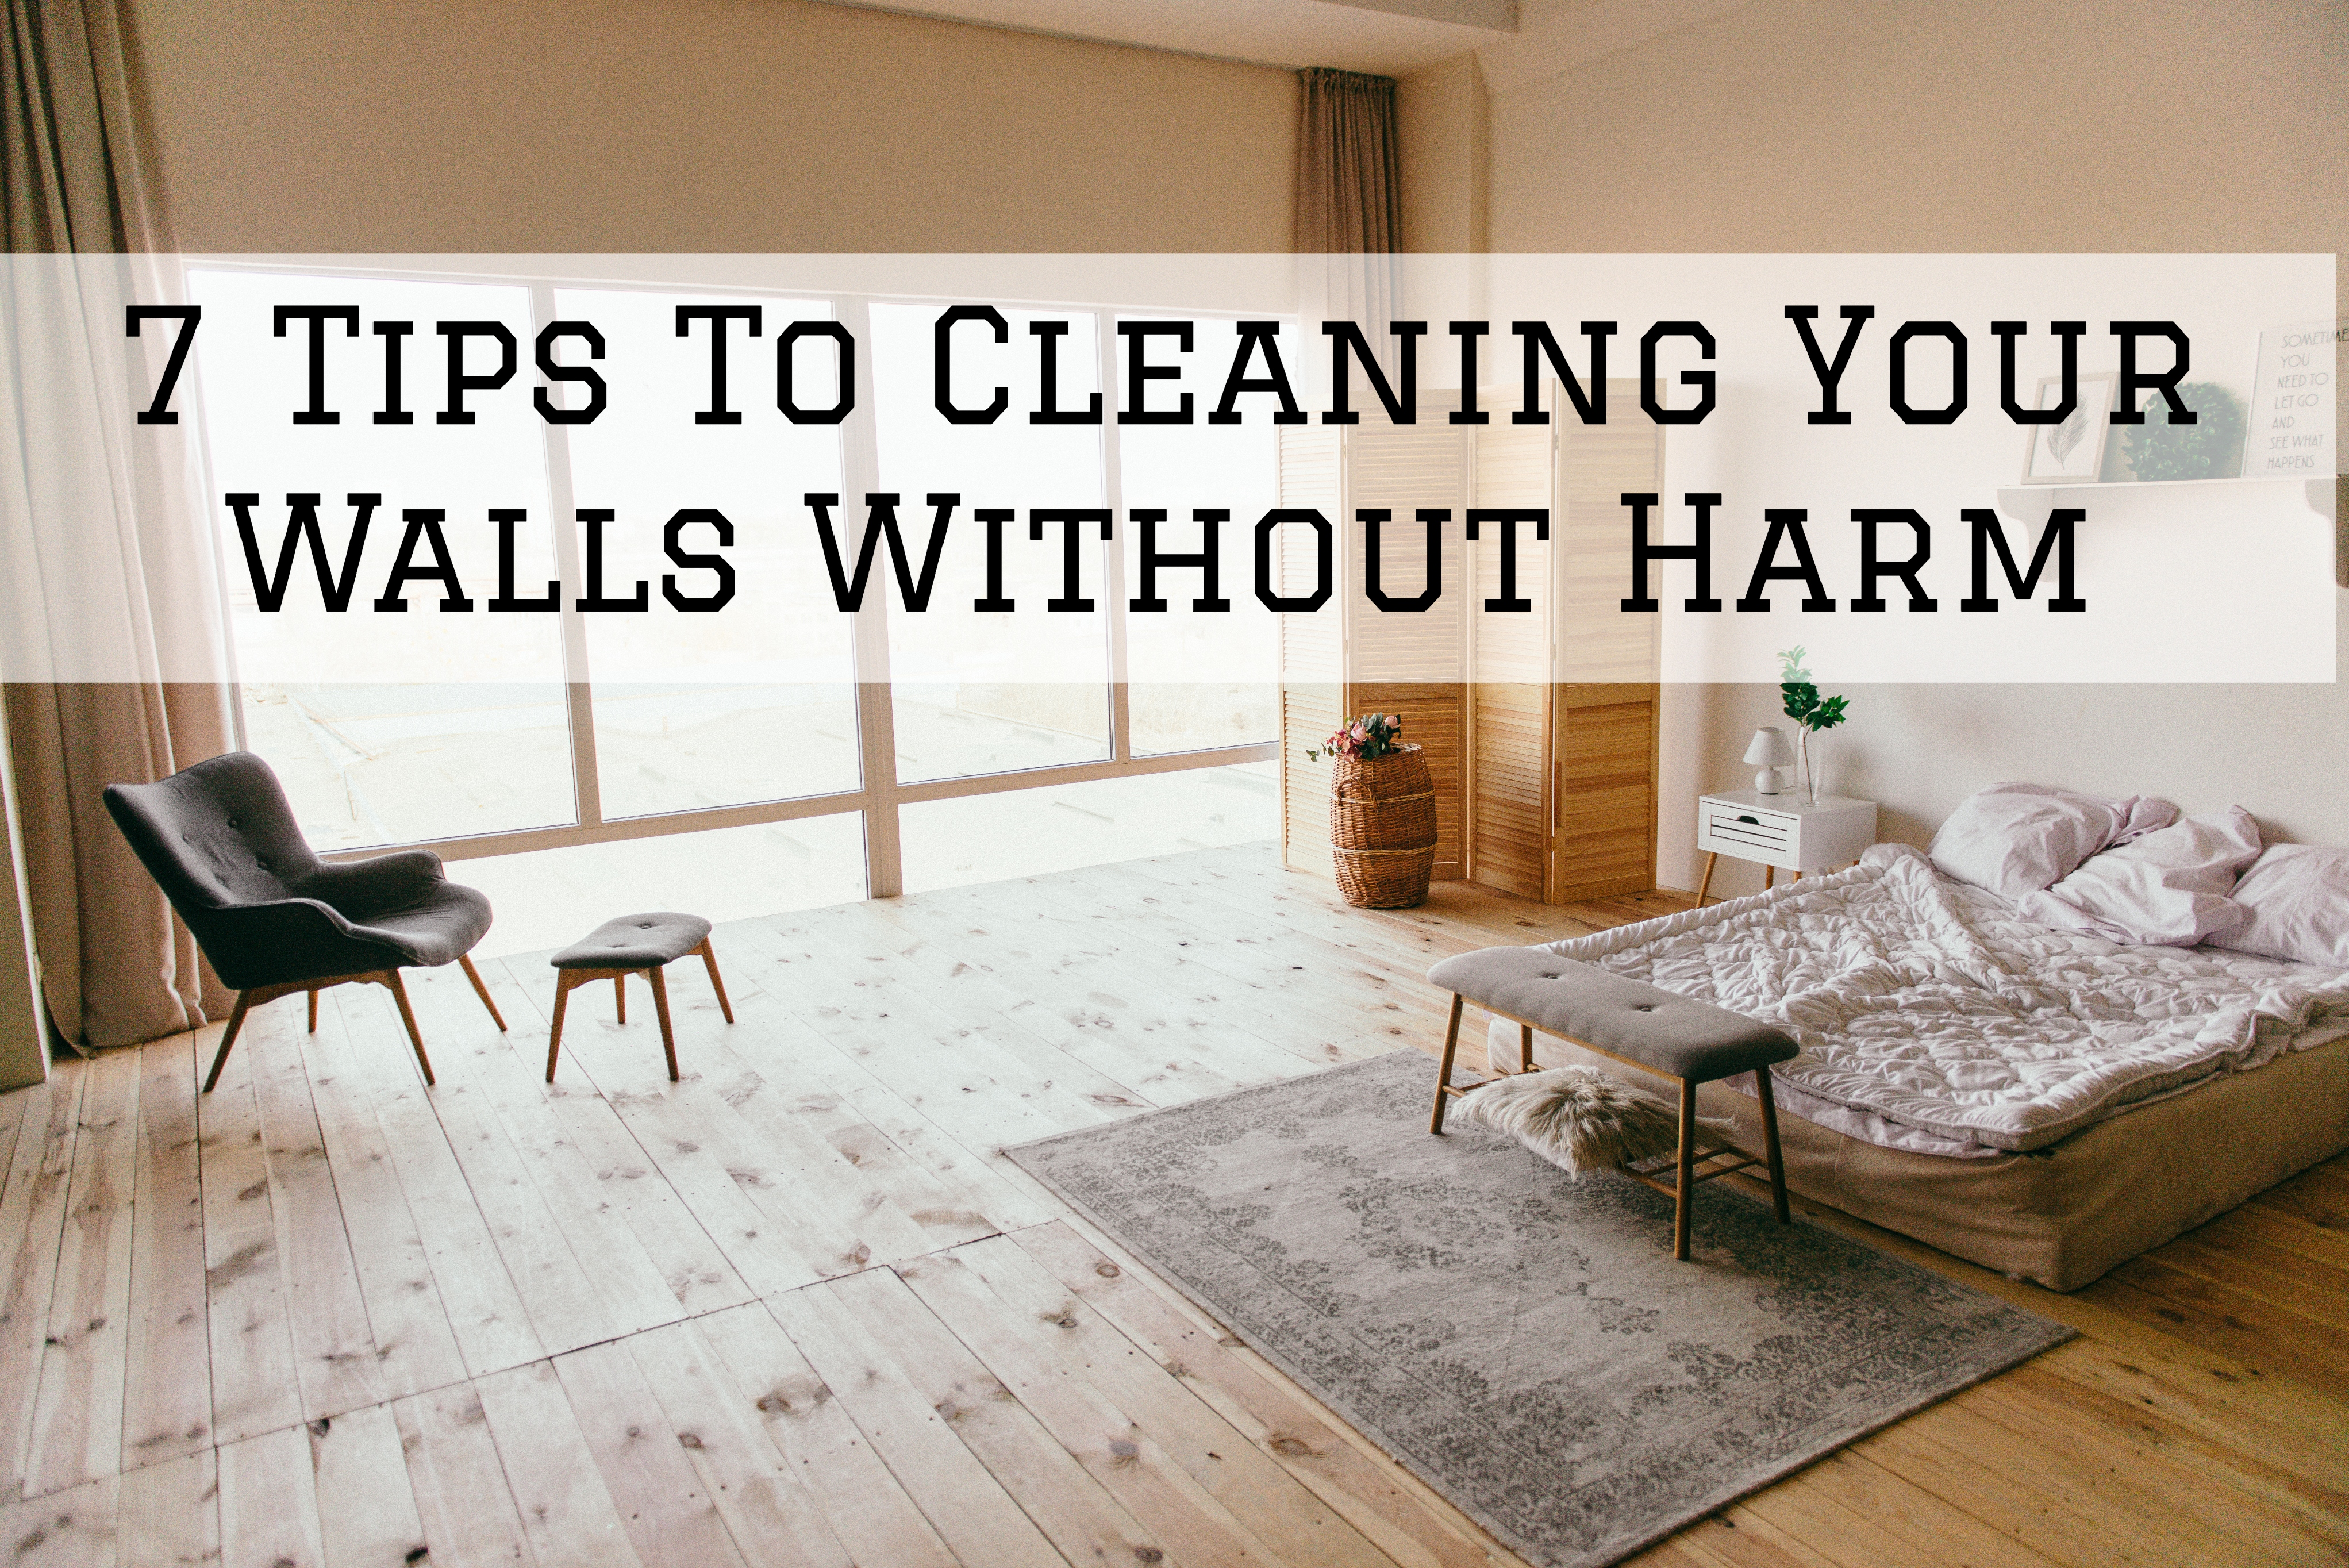 7 Tips To Cleaning Your Walls Without Harm in Ottawa, Ontario